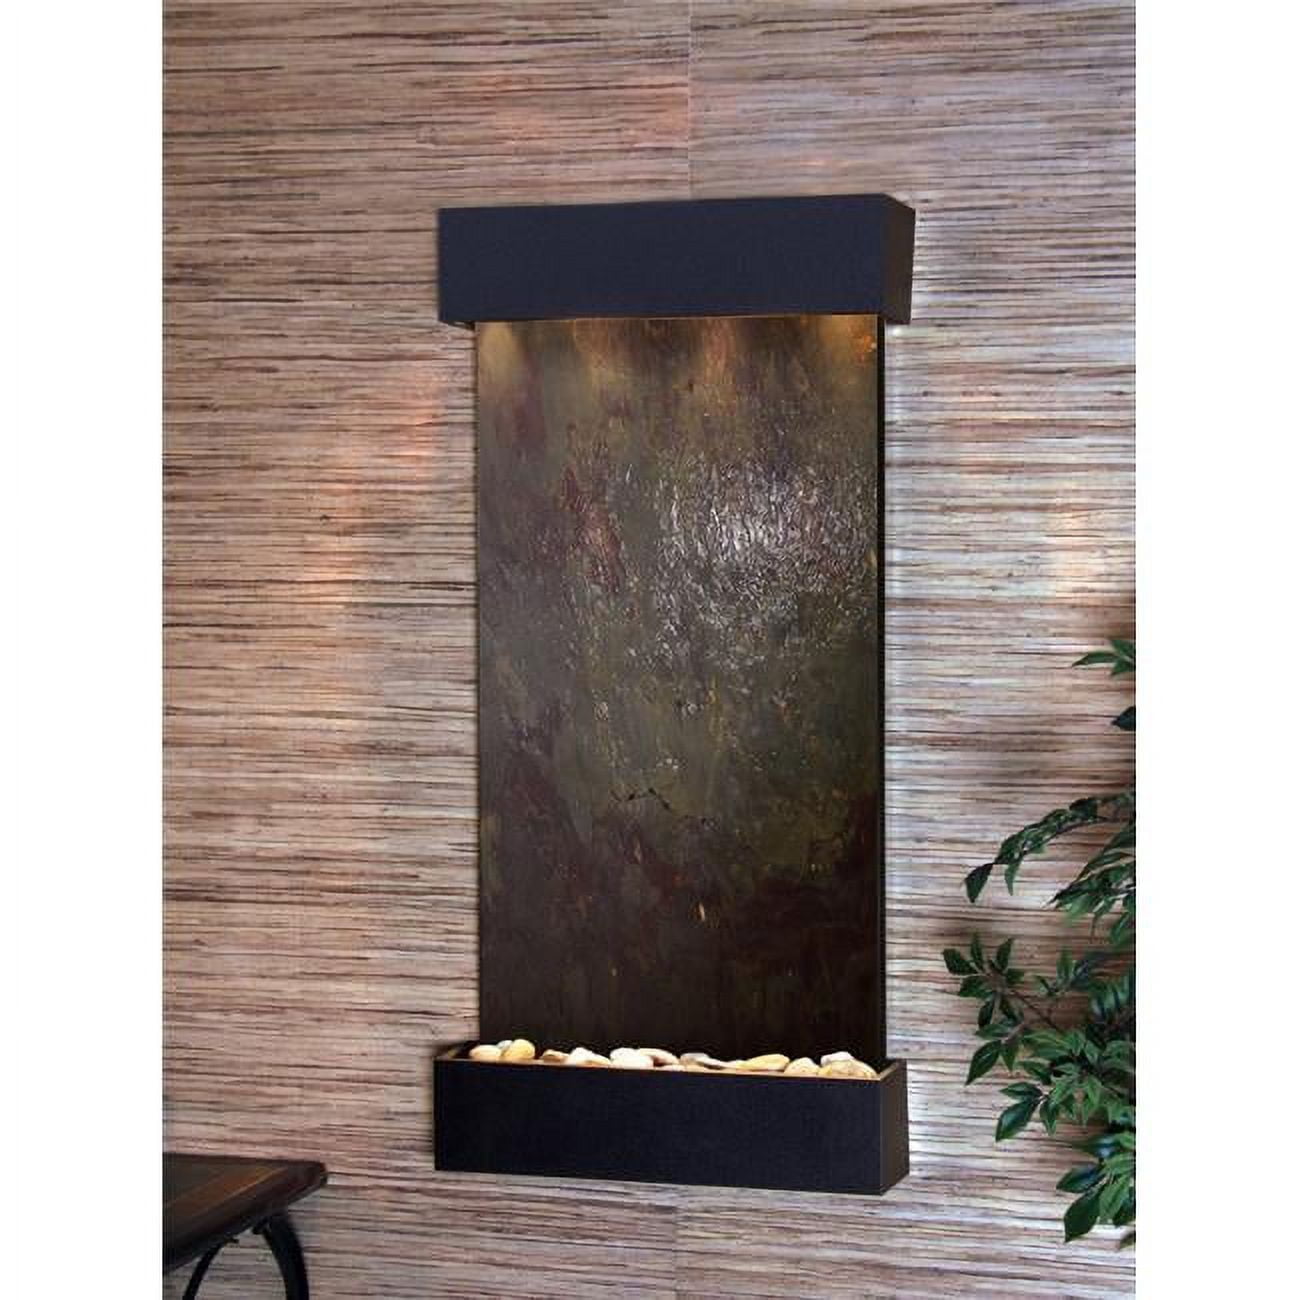 Adagio WCS1714 Whispering Creek Textured Black Multicolor Featherstone Wall Fountain